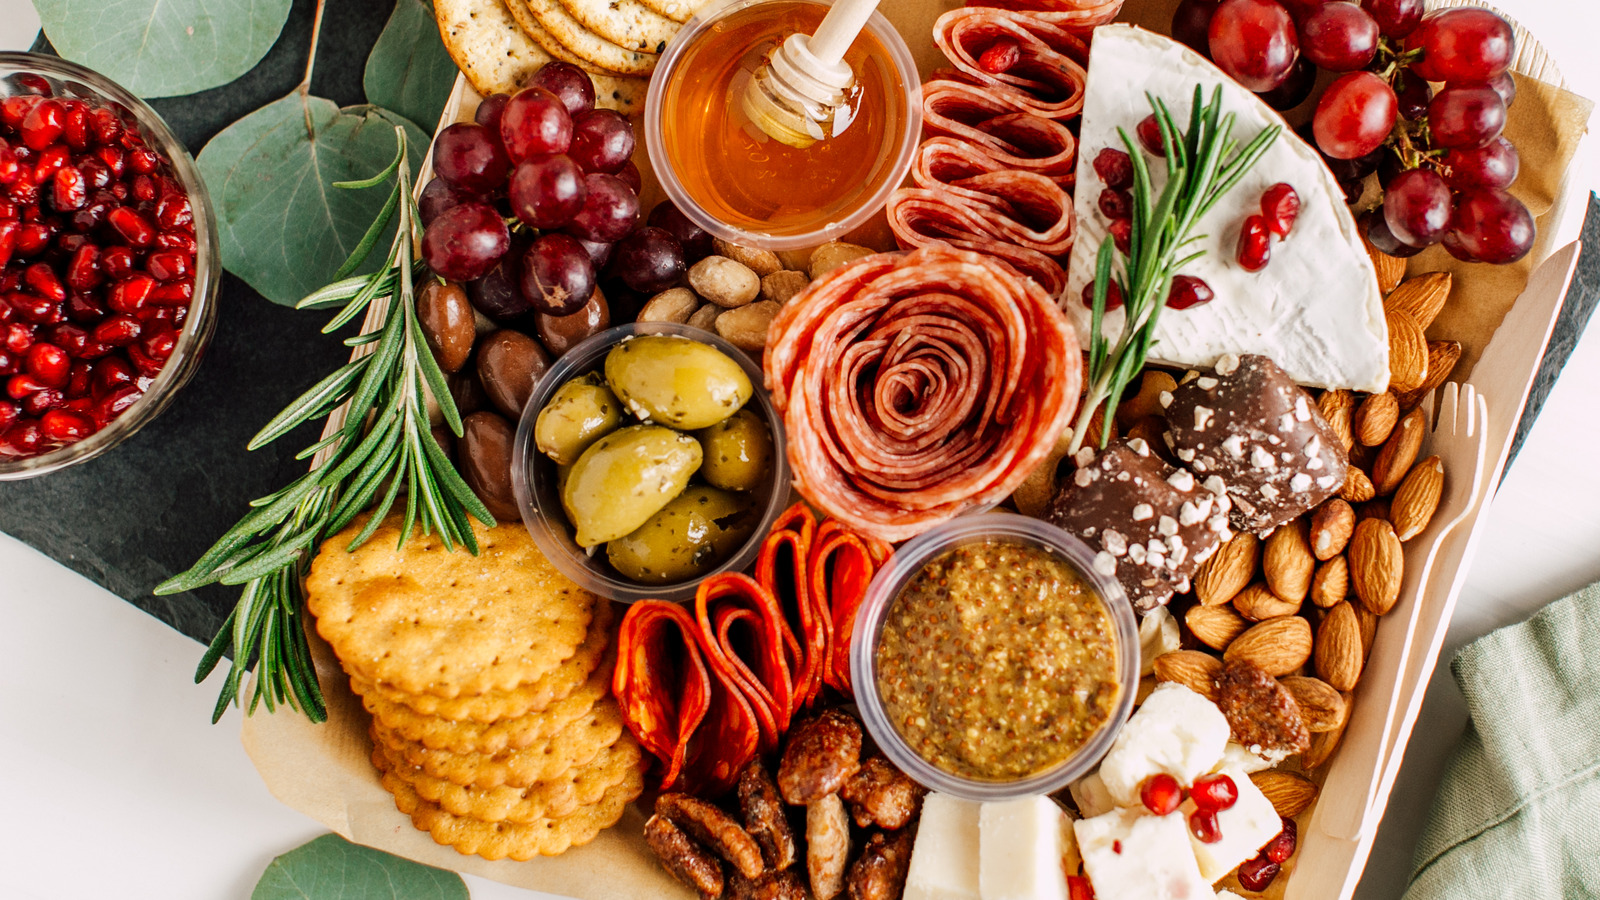 Charcuterie board @easylunchboxes style!! // Honey roasted peanuts